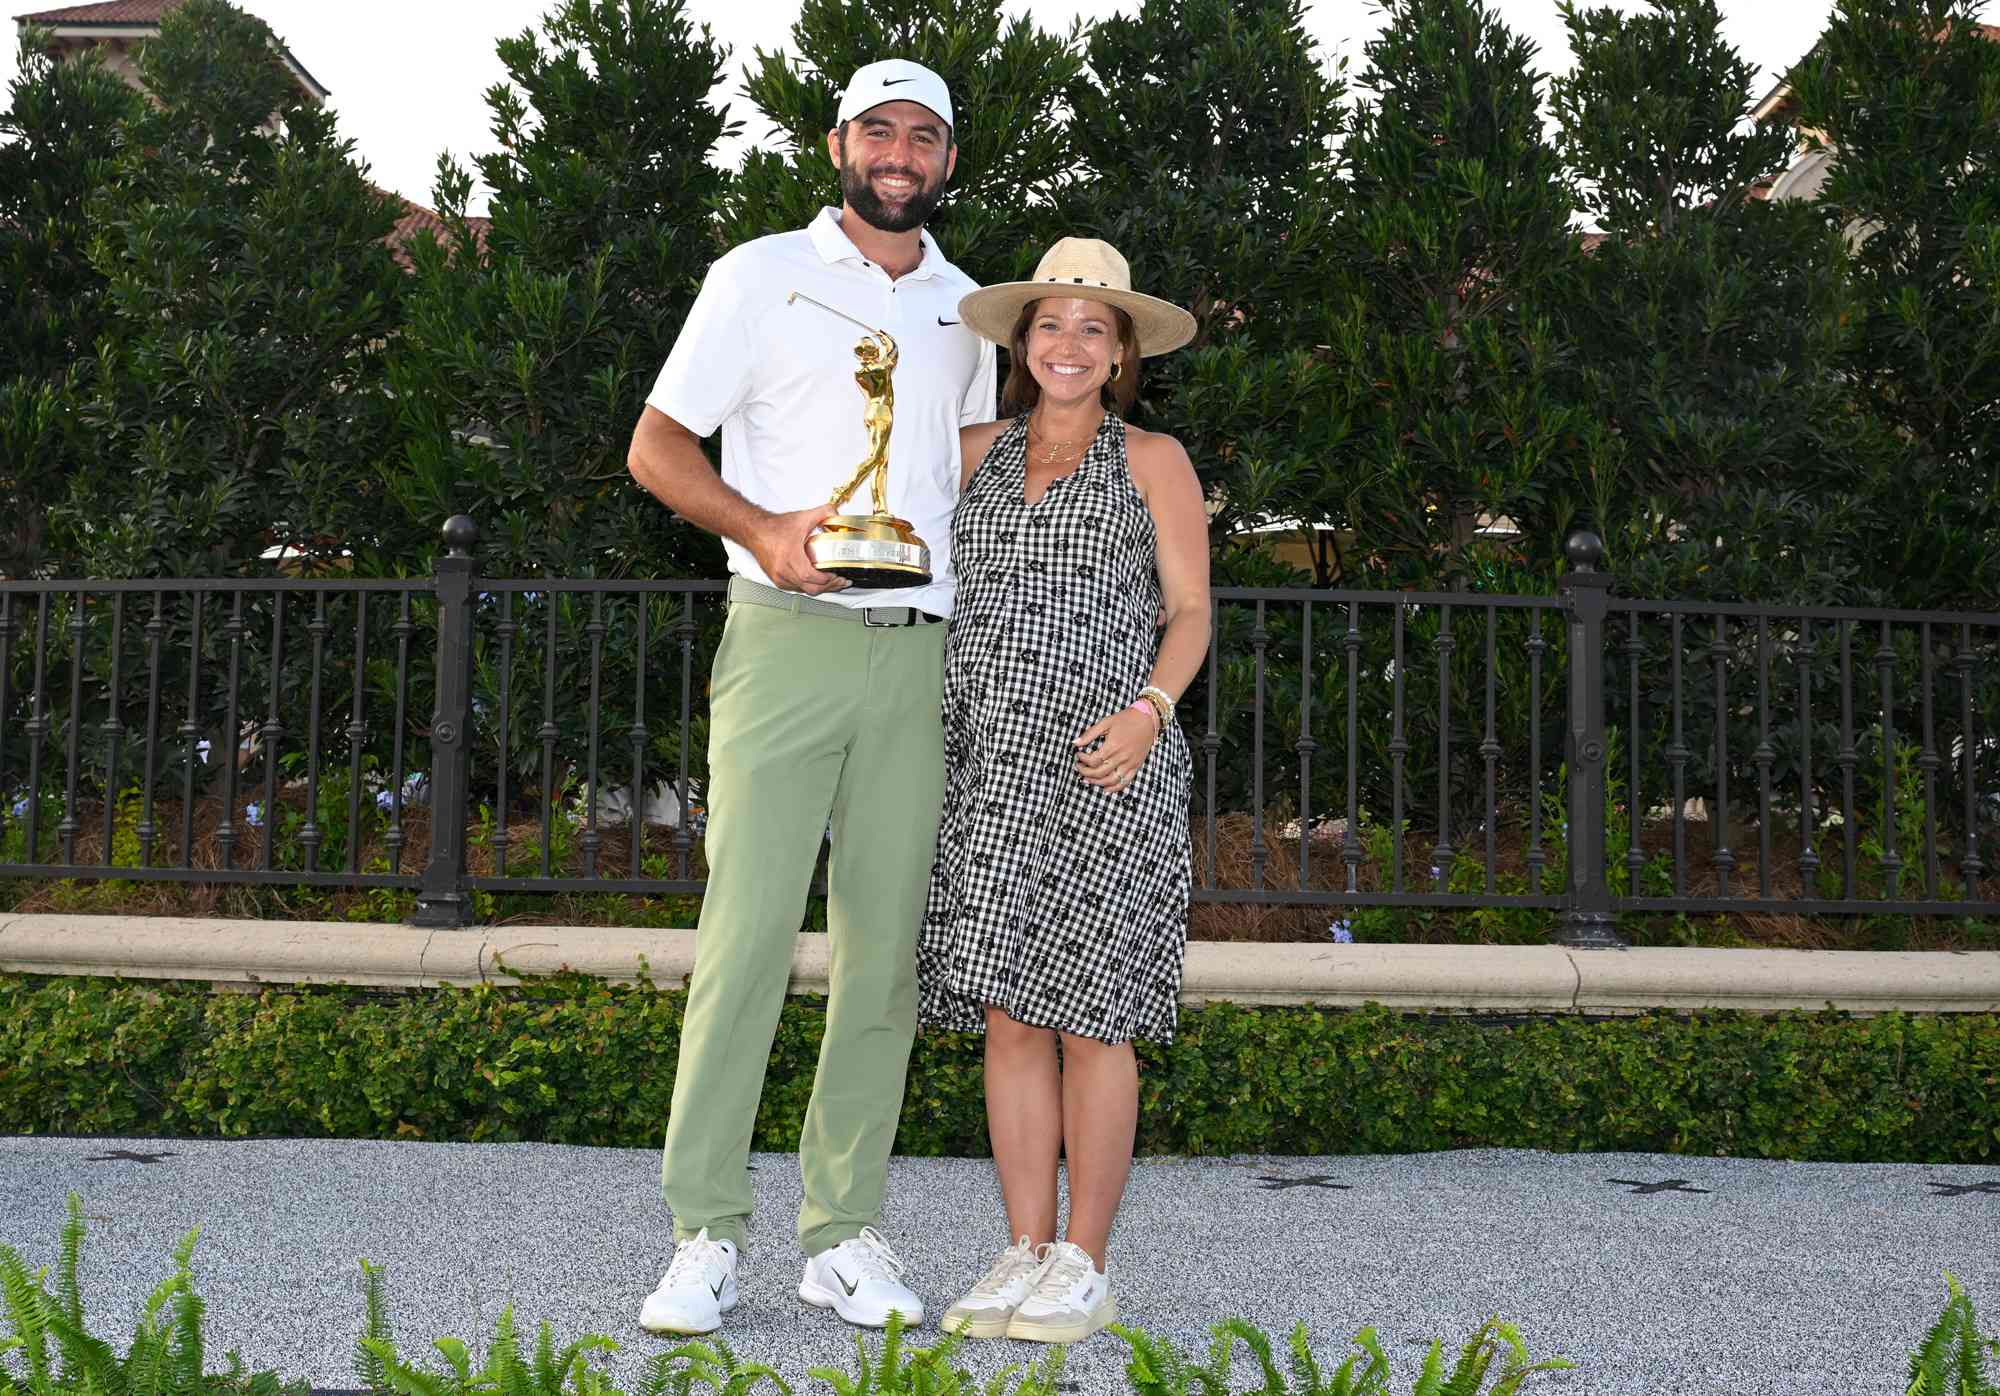 Scottie Scheffler of the United States poses with the PLAYERS Championship